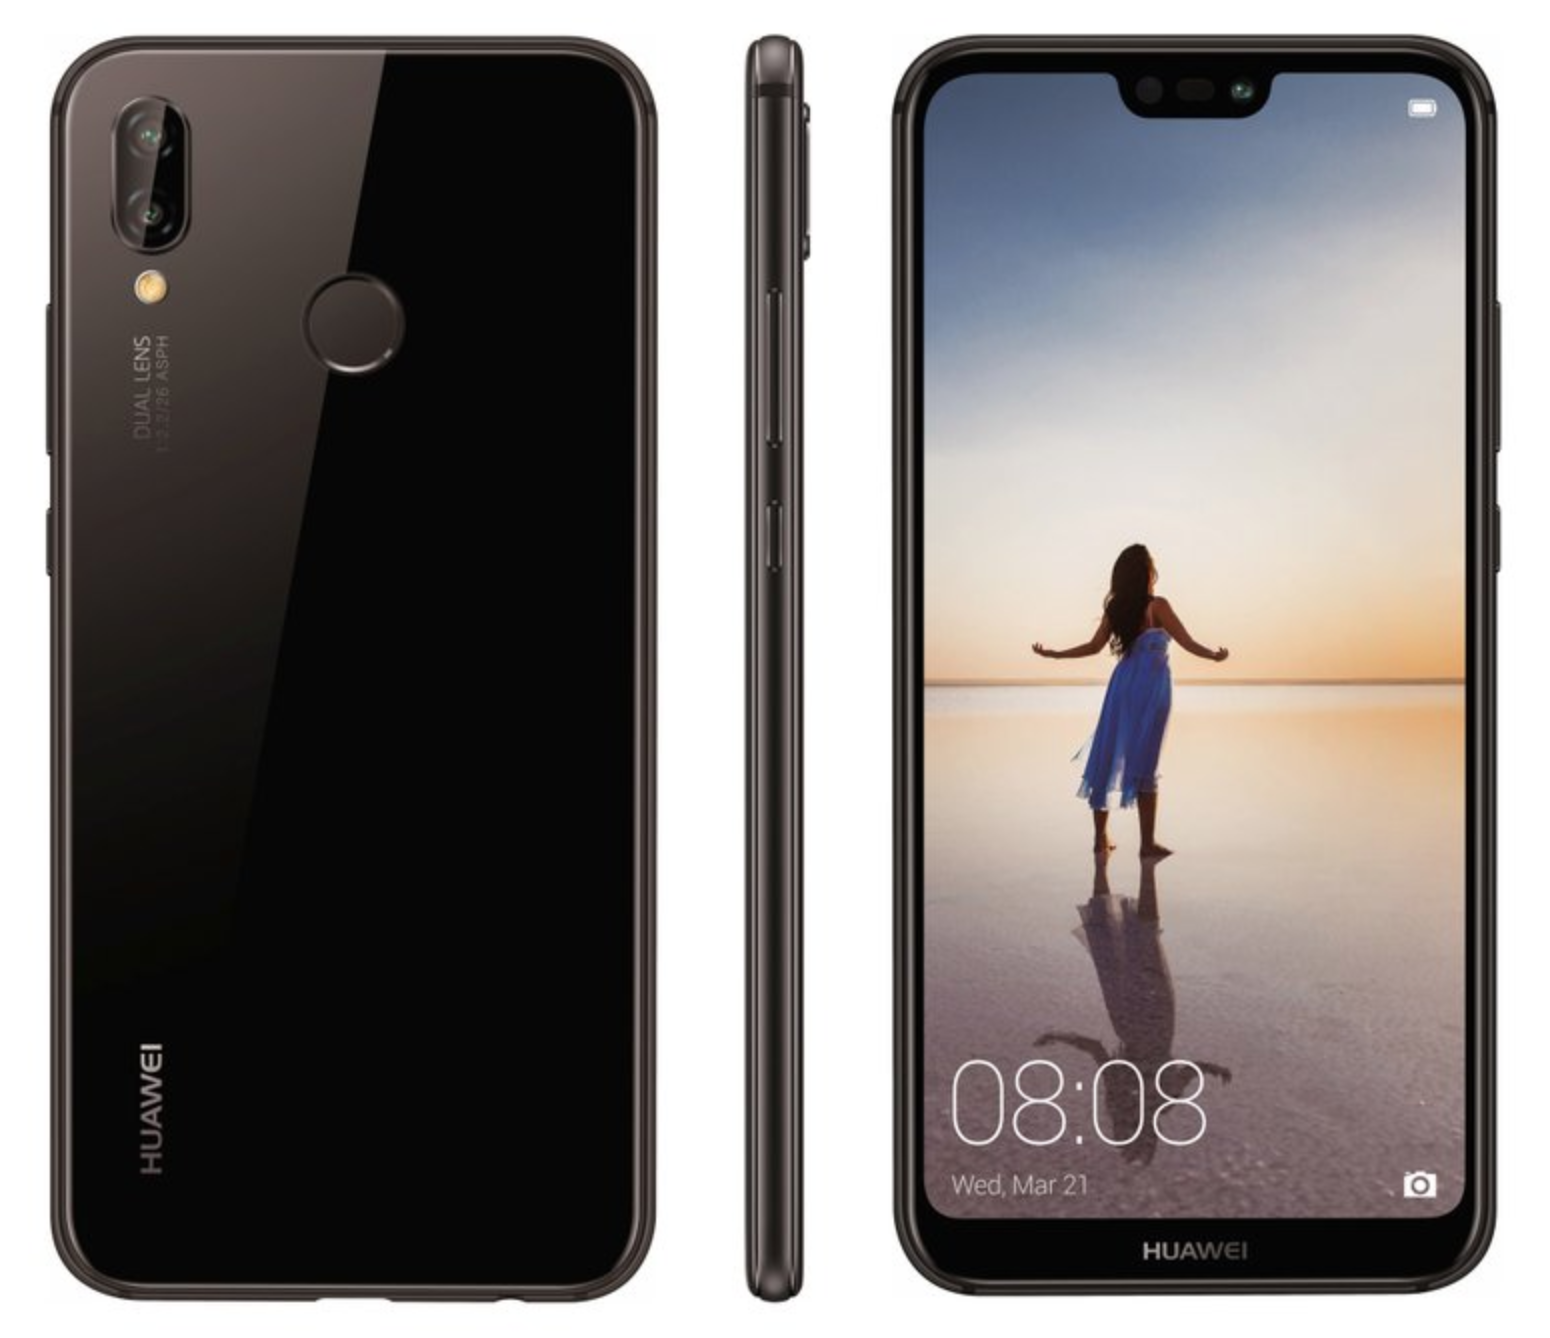 Is there anything else I should know about the Huawei P20?